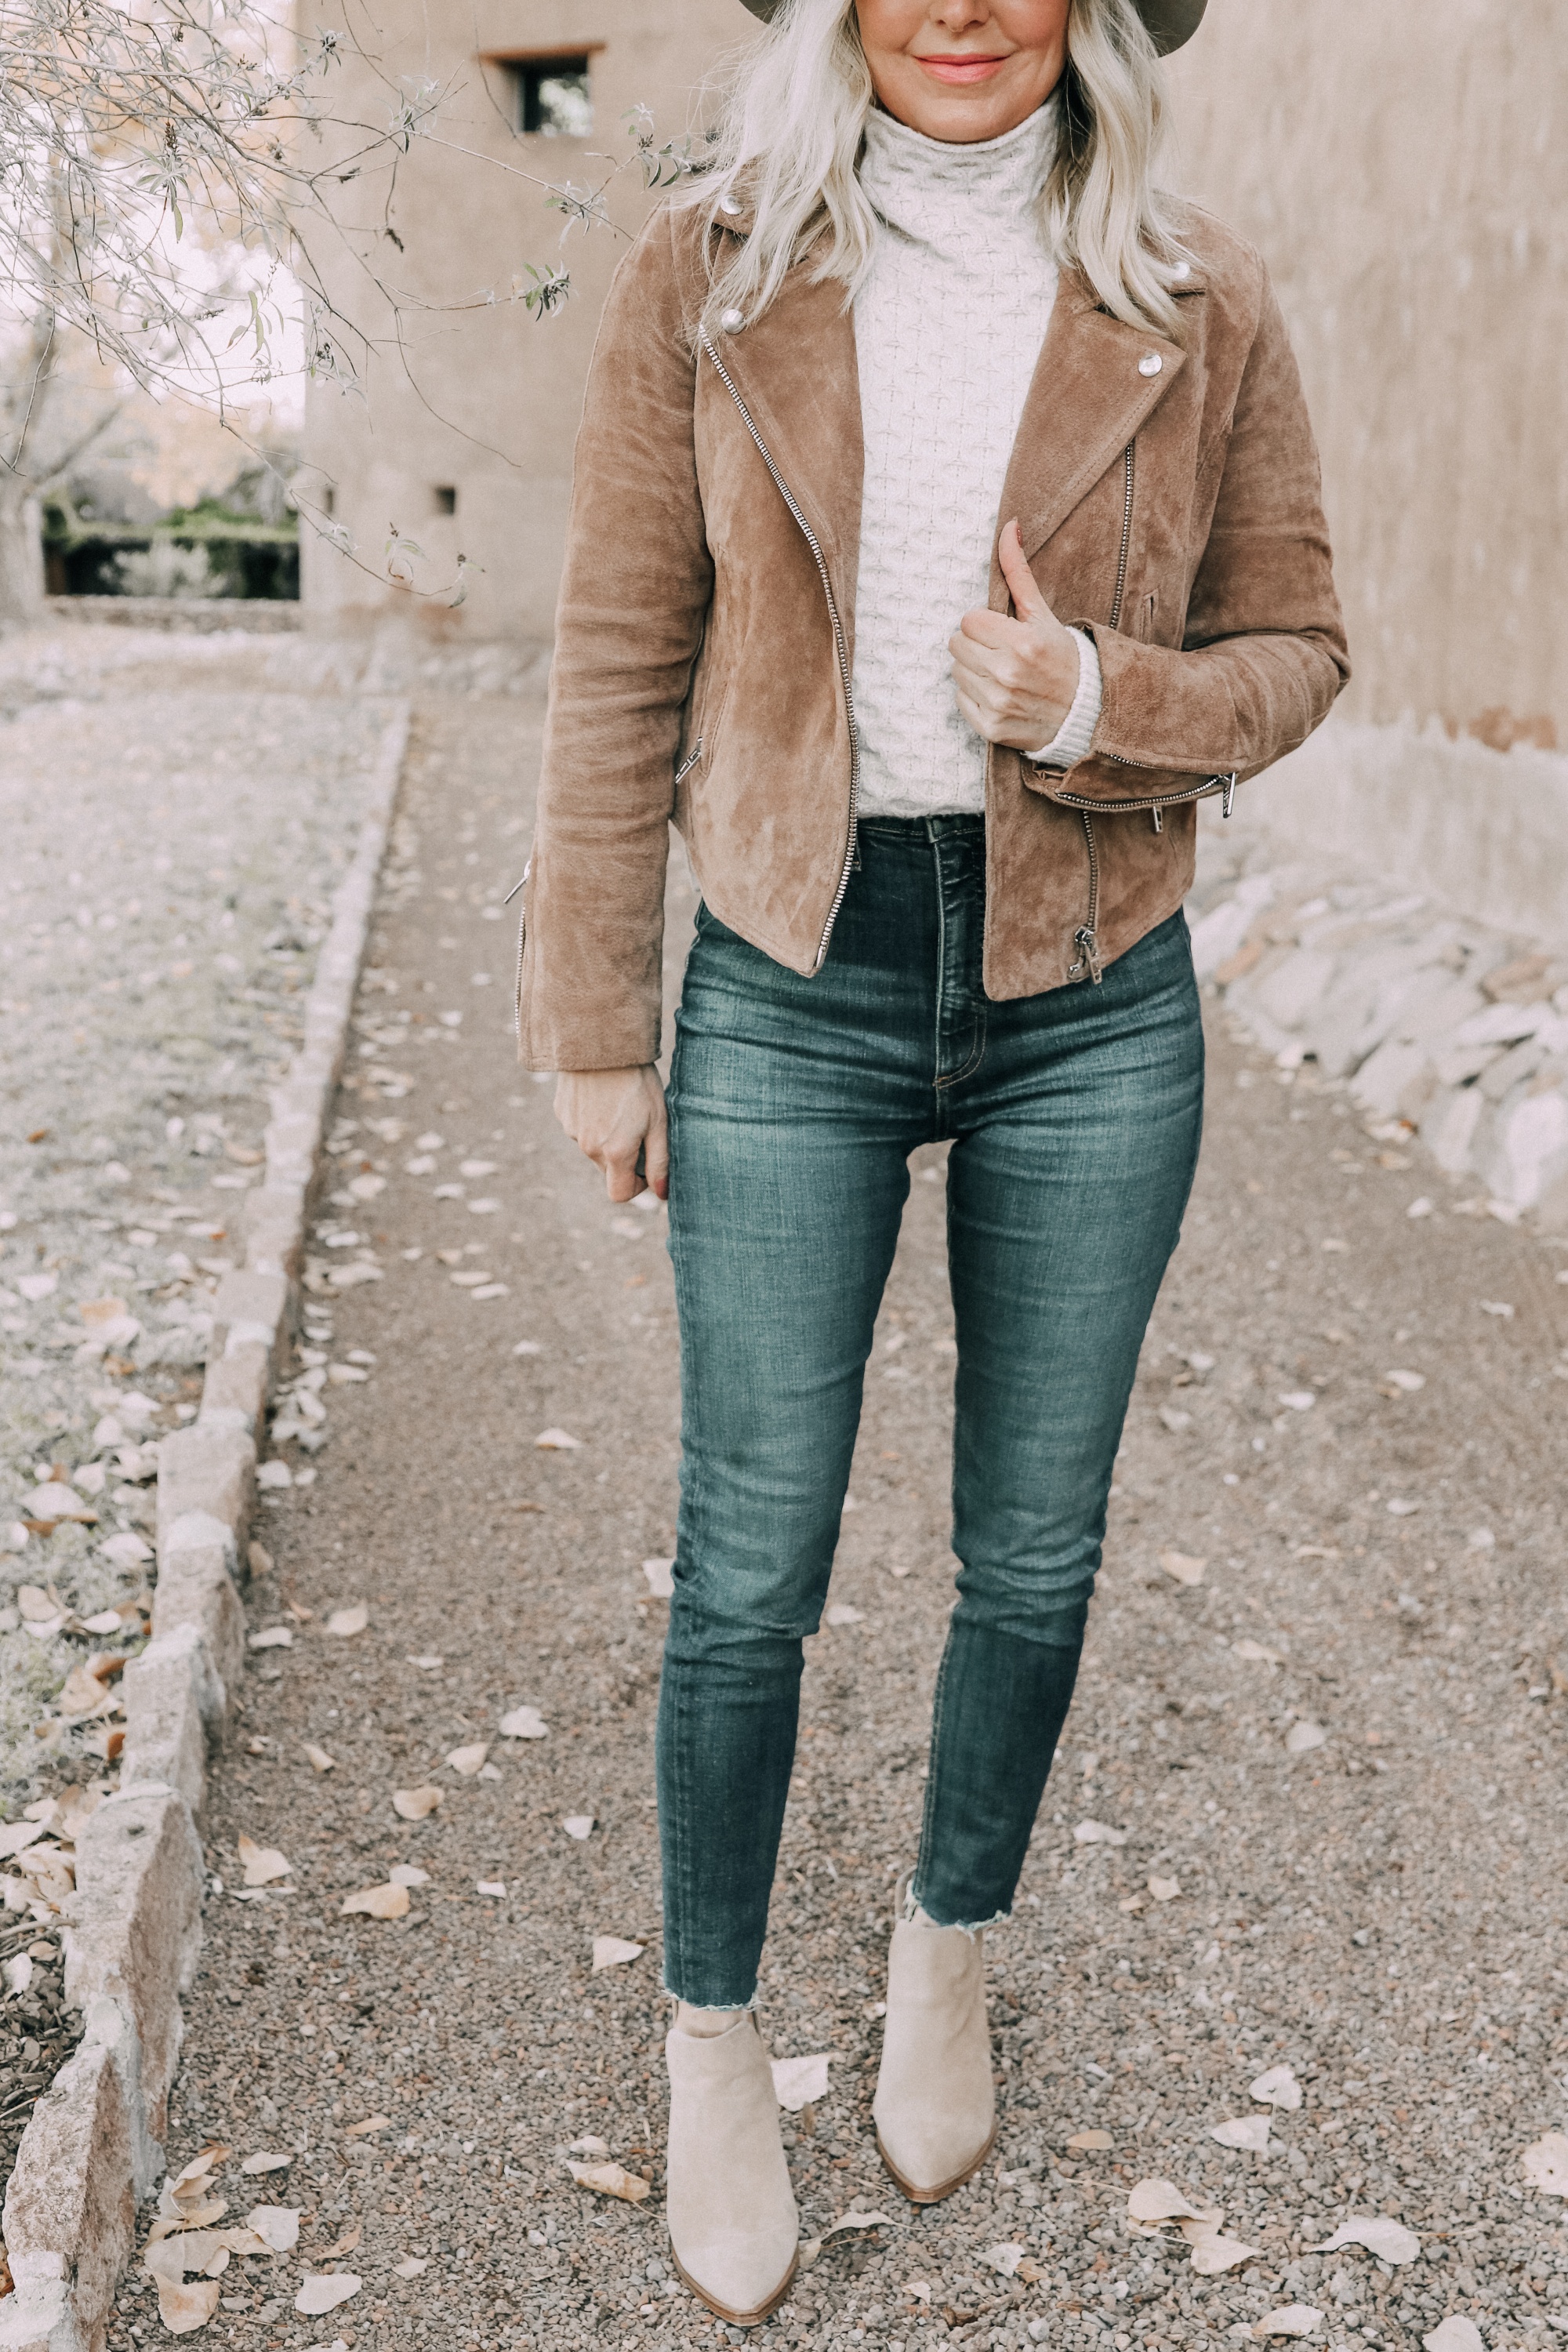 Women's fashion blogger, Erin Busbee, shares 10 tips for picking the right pair of jeans and wears Rag & Bone faded medium wash ankle skinny jeans